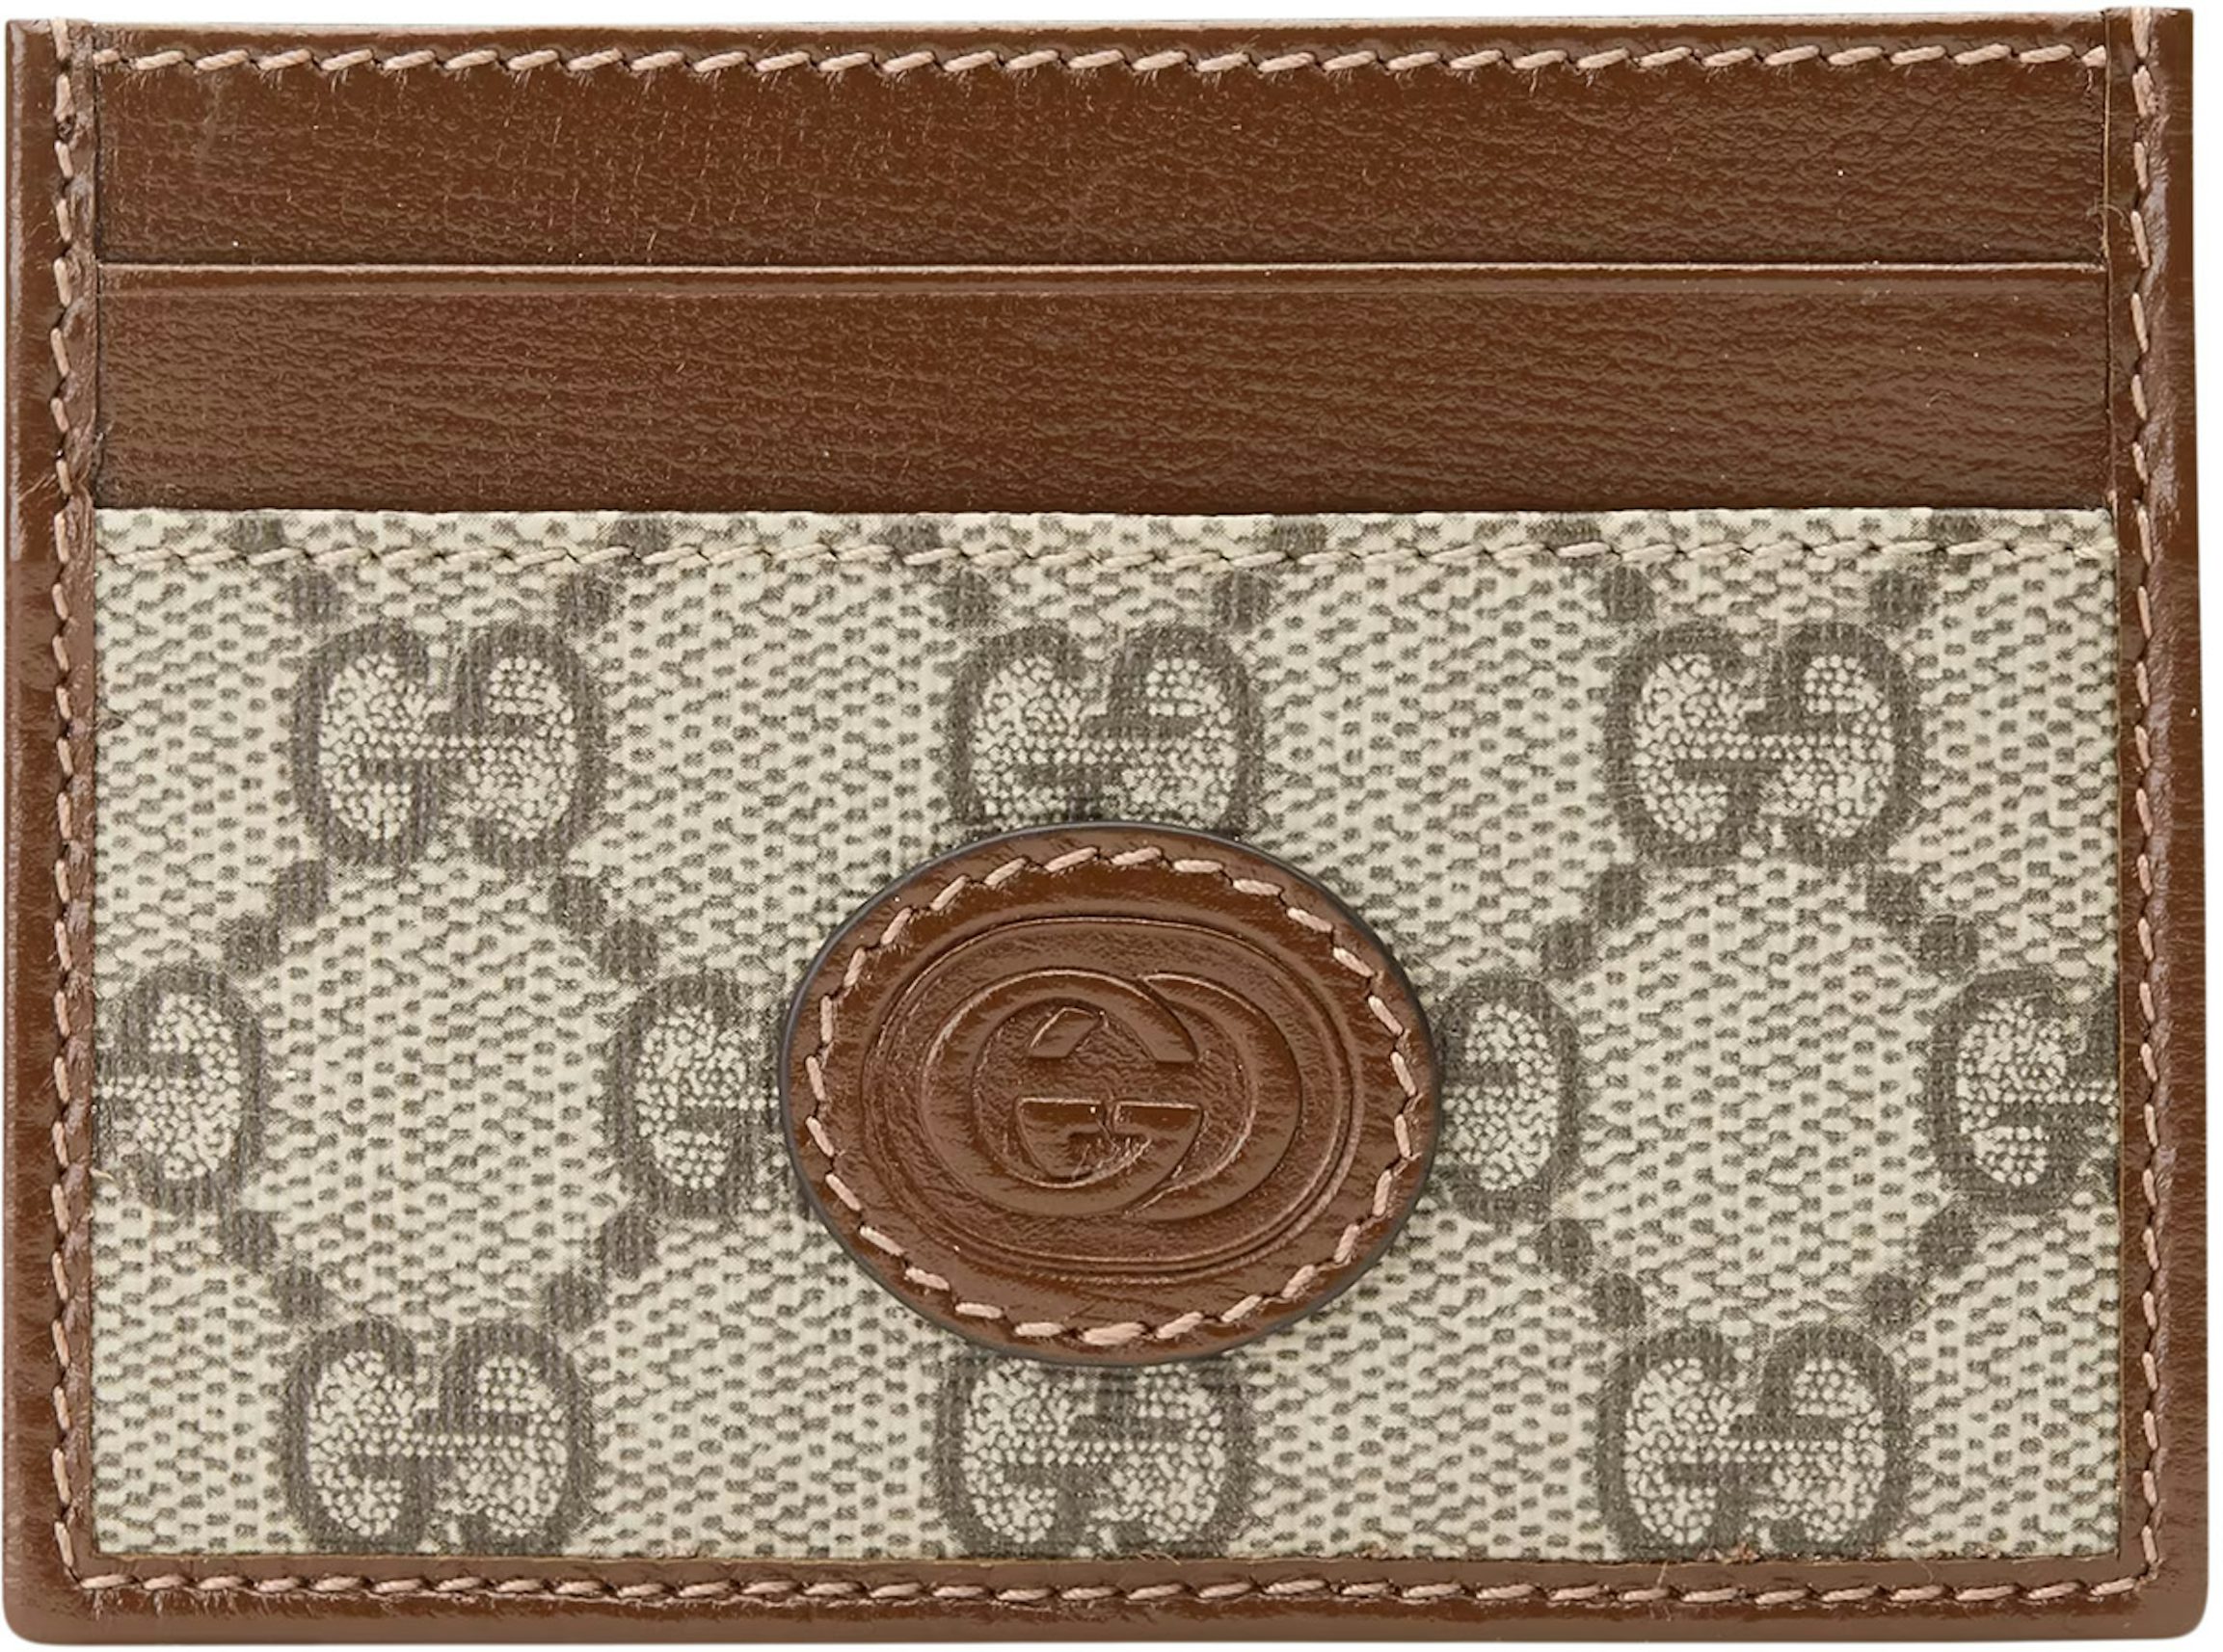 Card case with GG detail in beige and ebony Supreme